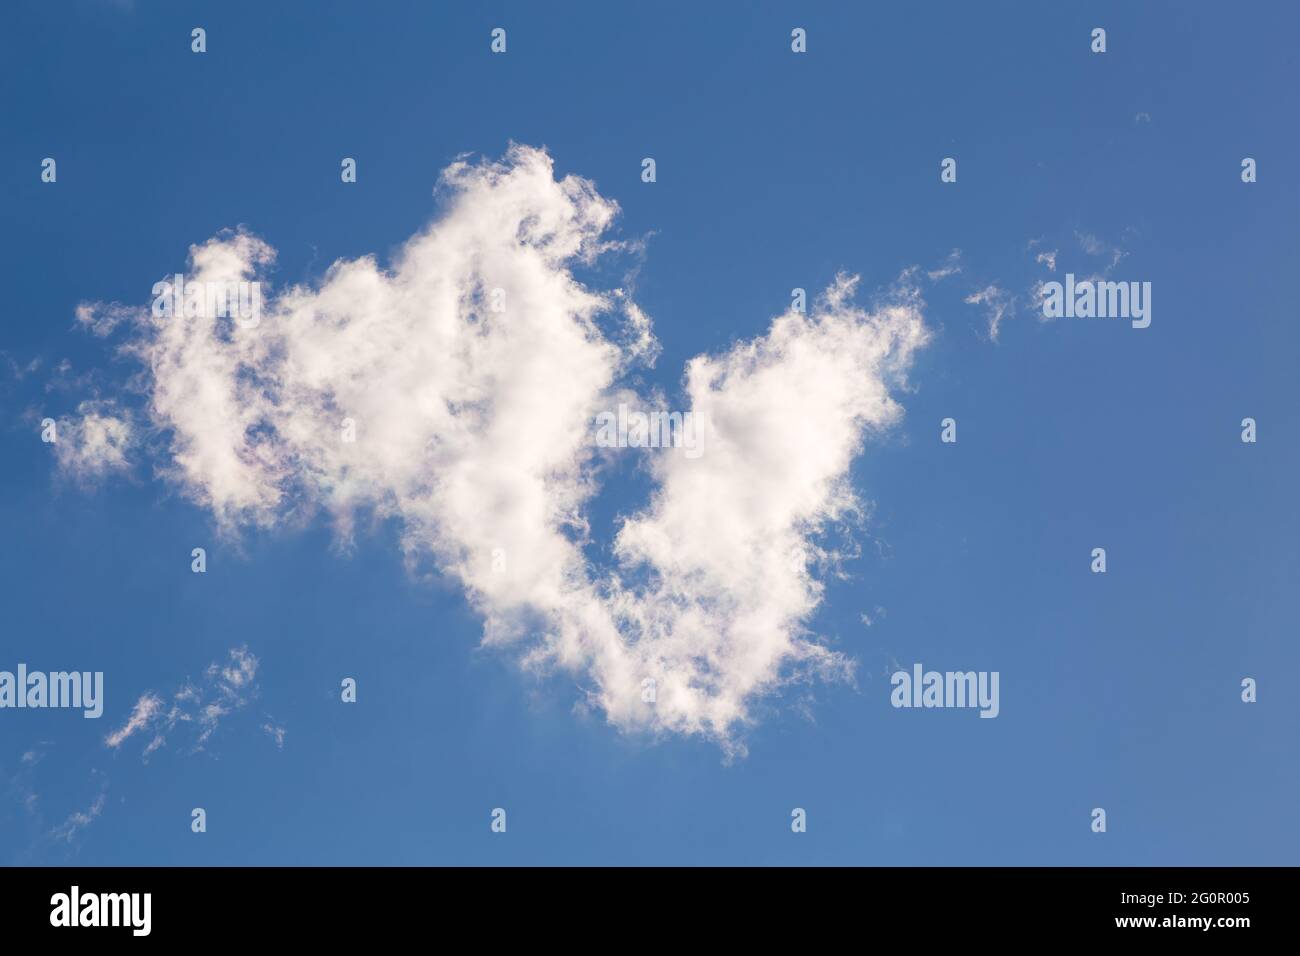 Beautiful blue sky with white cloud. Sky panorama for screensavers, postcards, calendar, presentations. Warm summer day. Stock Photo